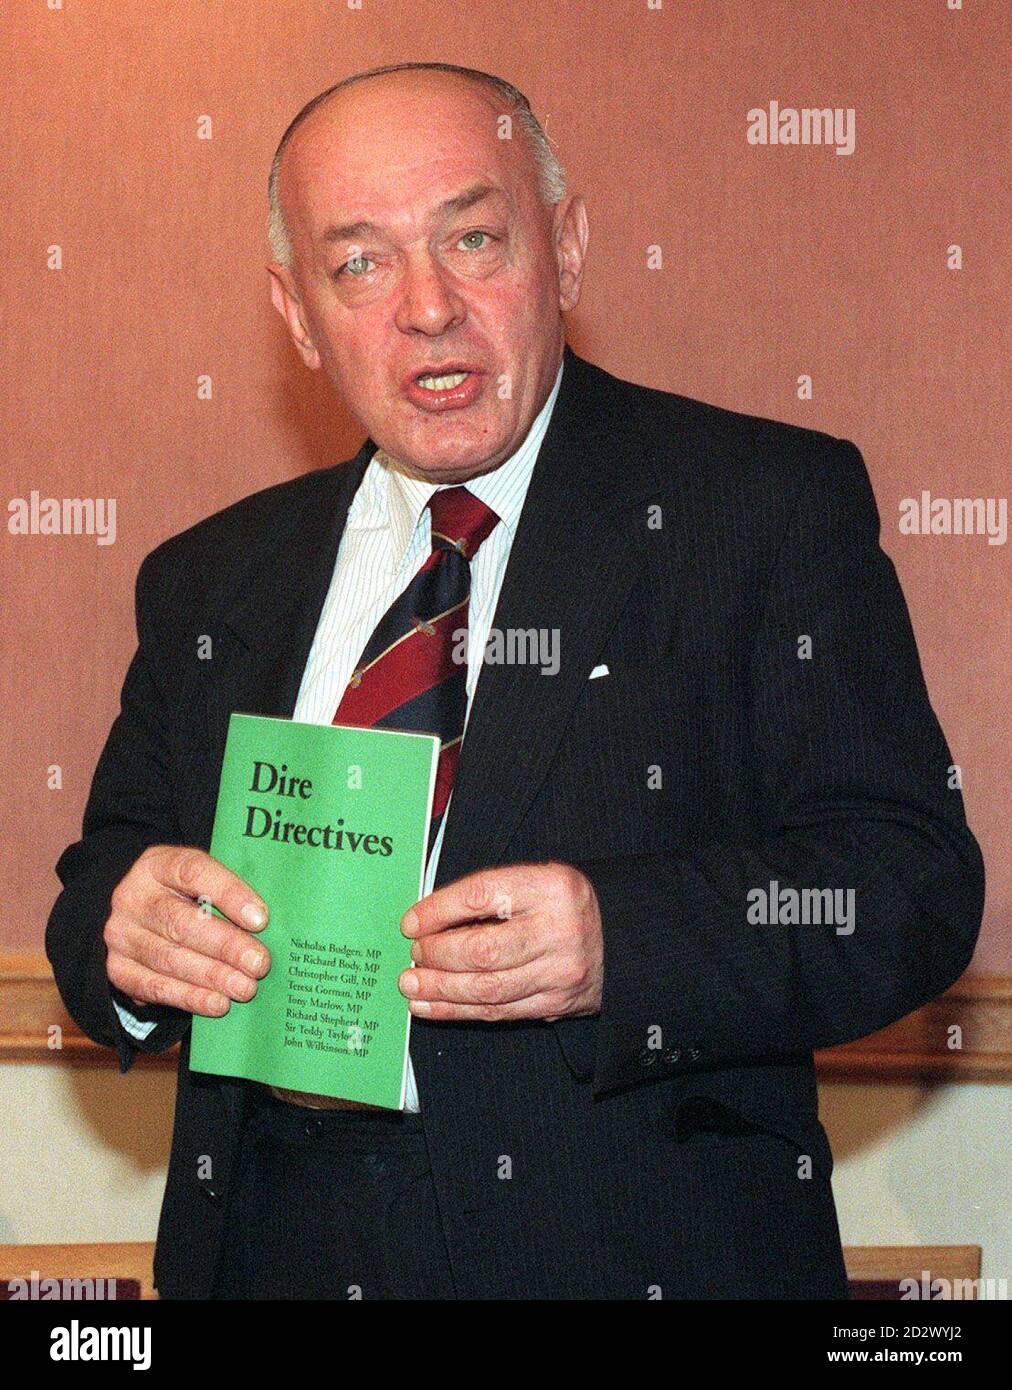 Warming to his theme of European intrusion into British affairs, Tory MP Sir Teddy Taylor speaks at the launch of the pamphlet 'Dire Directives'  detailing the legion of regulations and requirements laid down by the EU which he and his fellow anti-Europeans deem to lack meaning and sense. Stock Photo